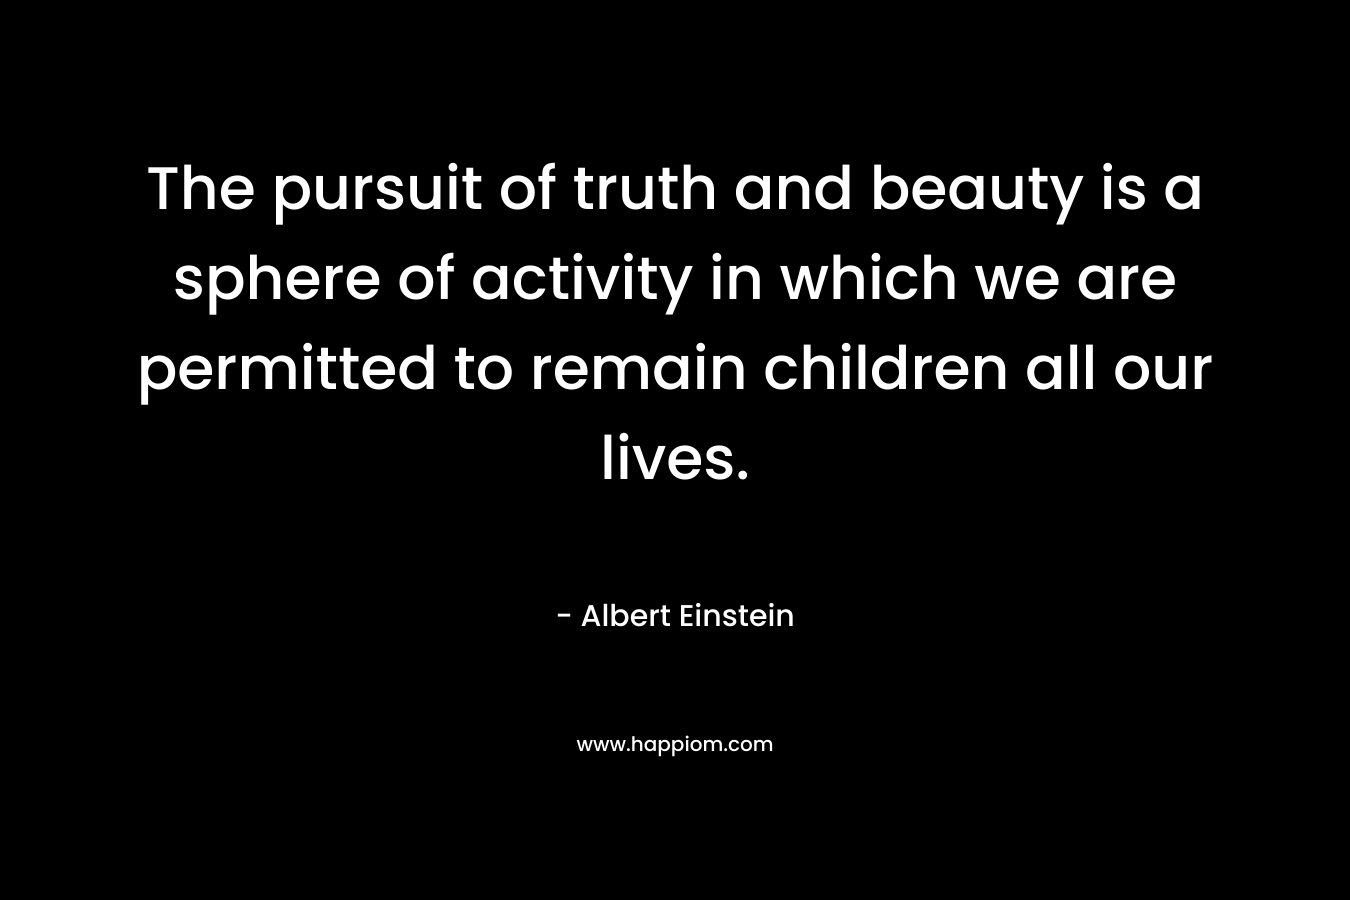 The pursuit of truth and beauty is a sphere of activity in which we are permitted to remain children all our lives. – Albert Einstein